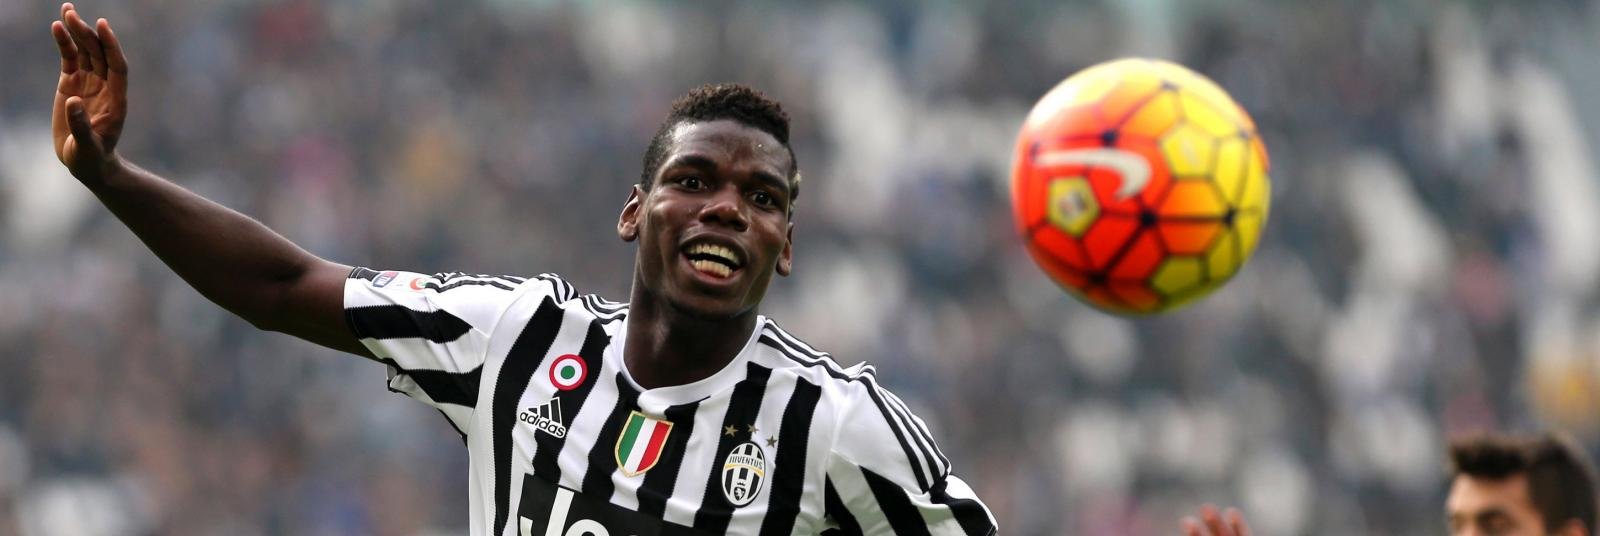 Manchester United begin talks over world record £100m deal for Juventus star